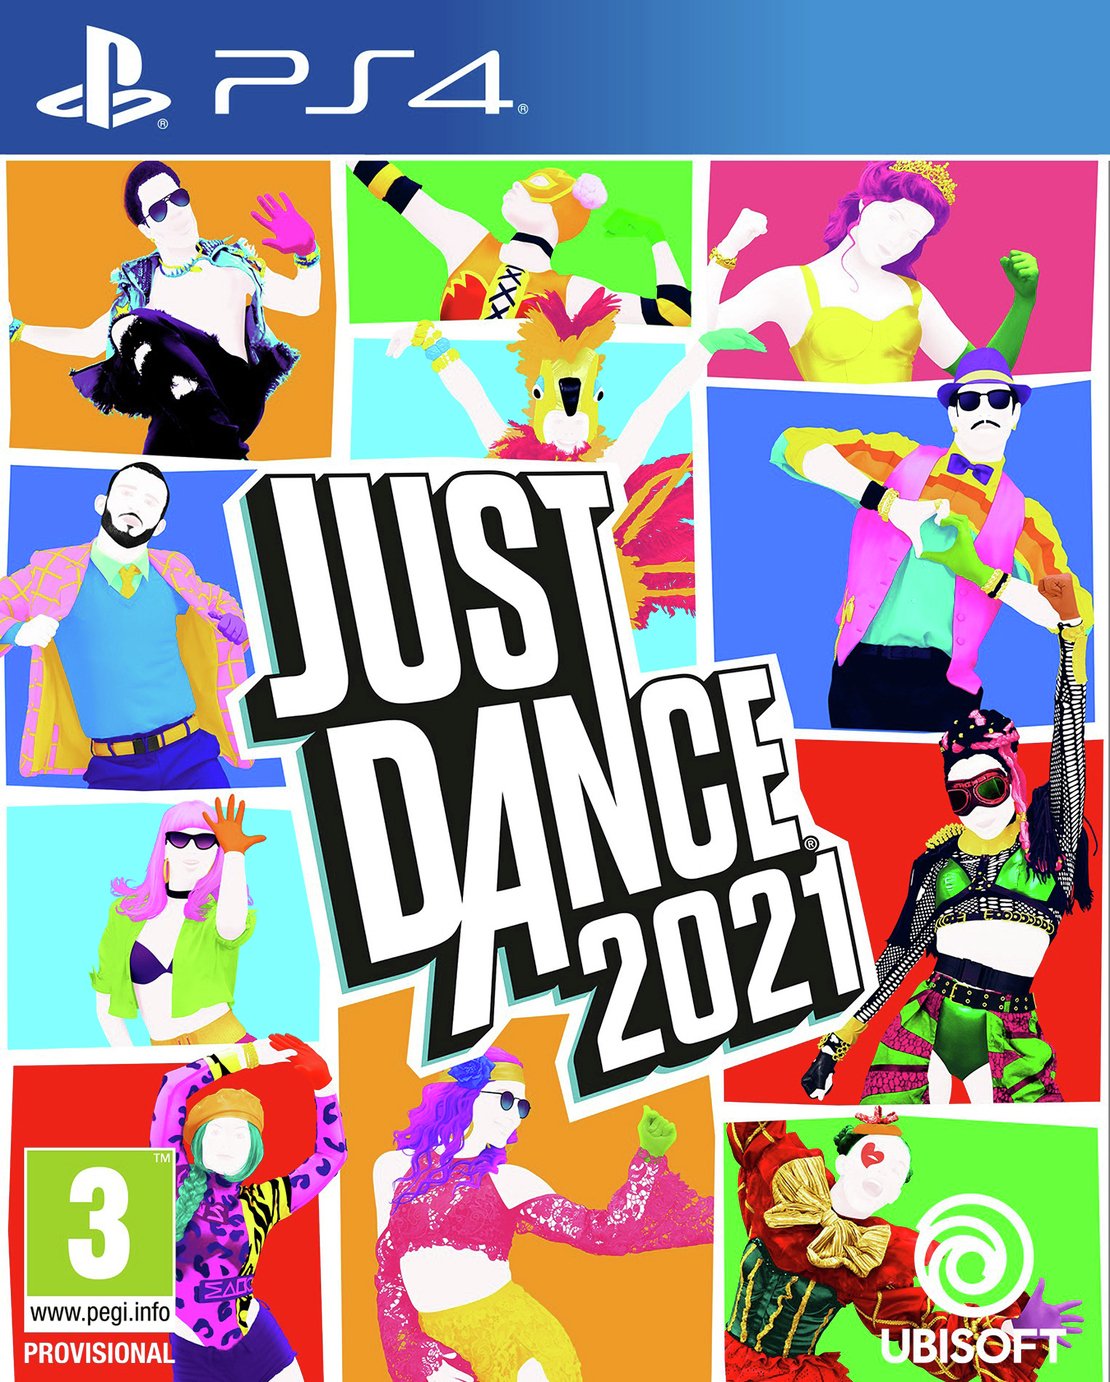 Just Dance 2021 PS4 Game Pre-Order Review